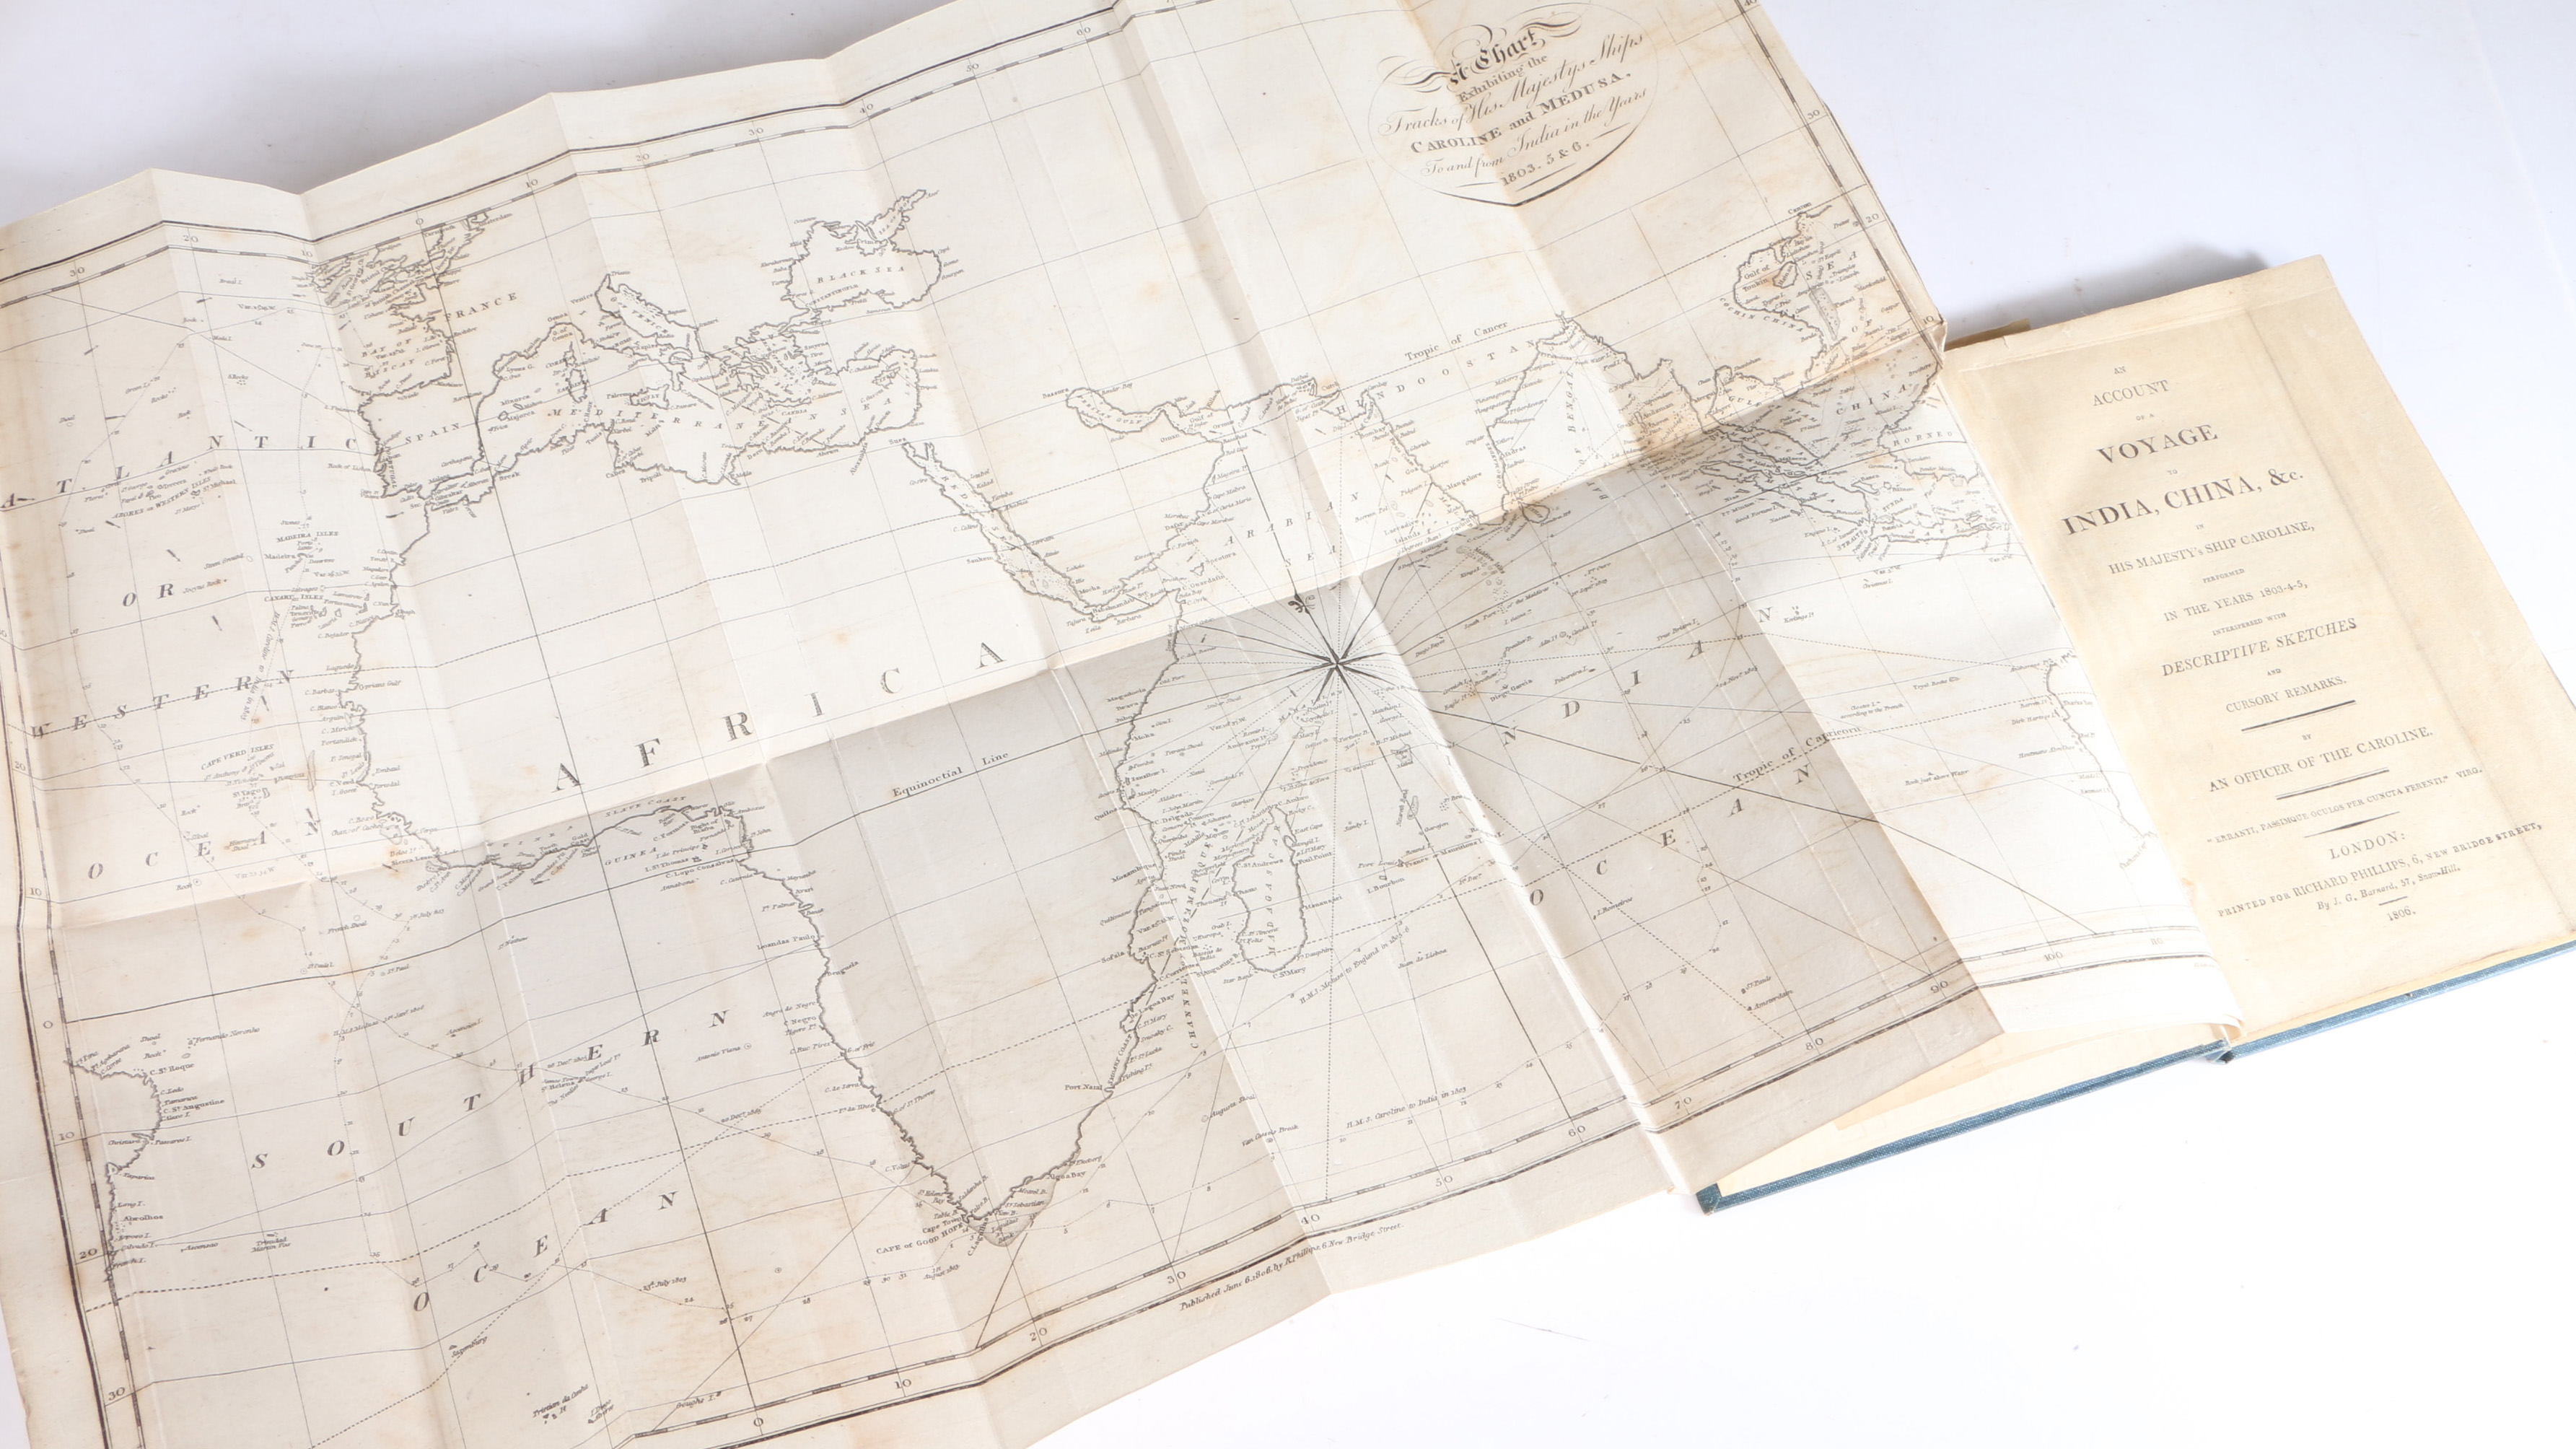 Exploration Interest - An Account of a Voyage to India, China &c in His Majesty's Ship Caroline in - Image 2 of 3